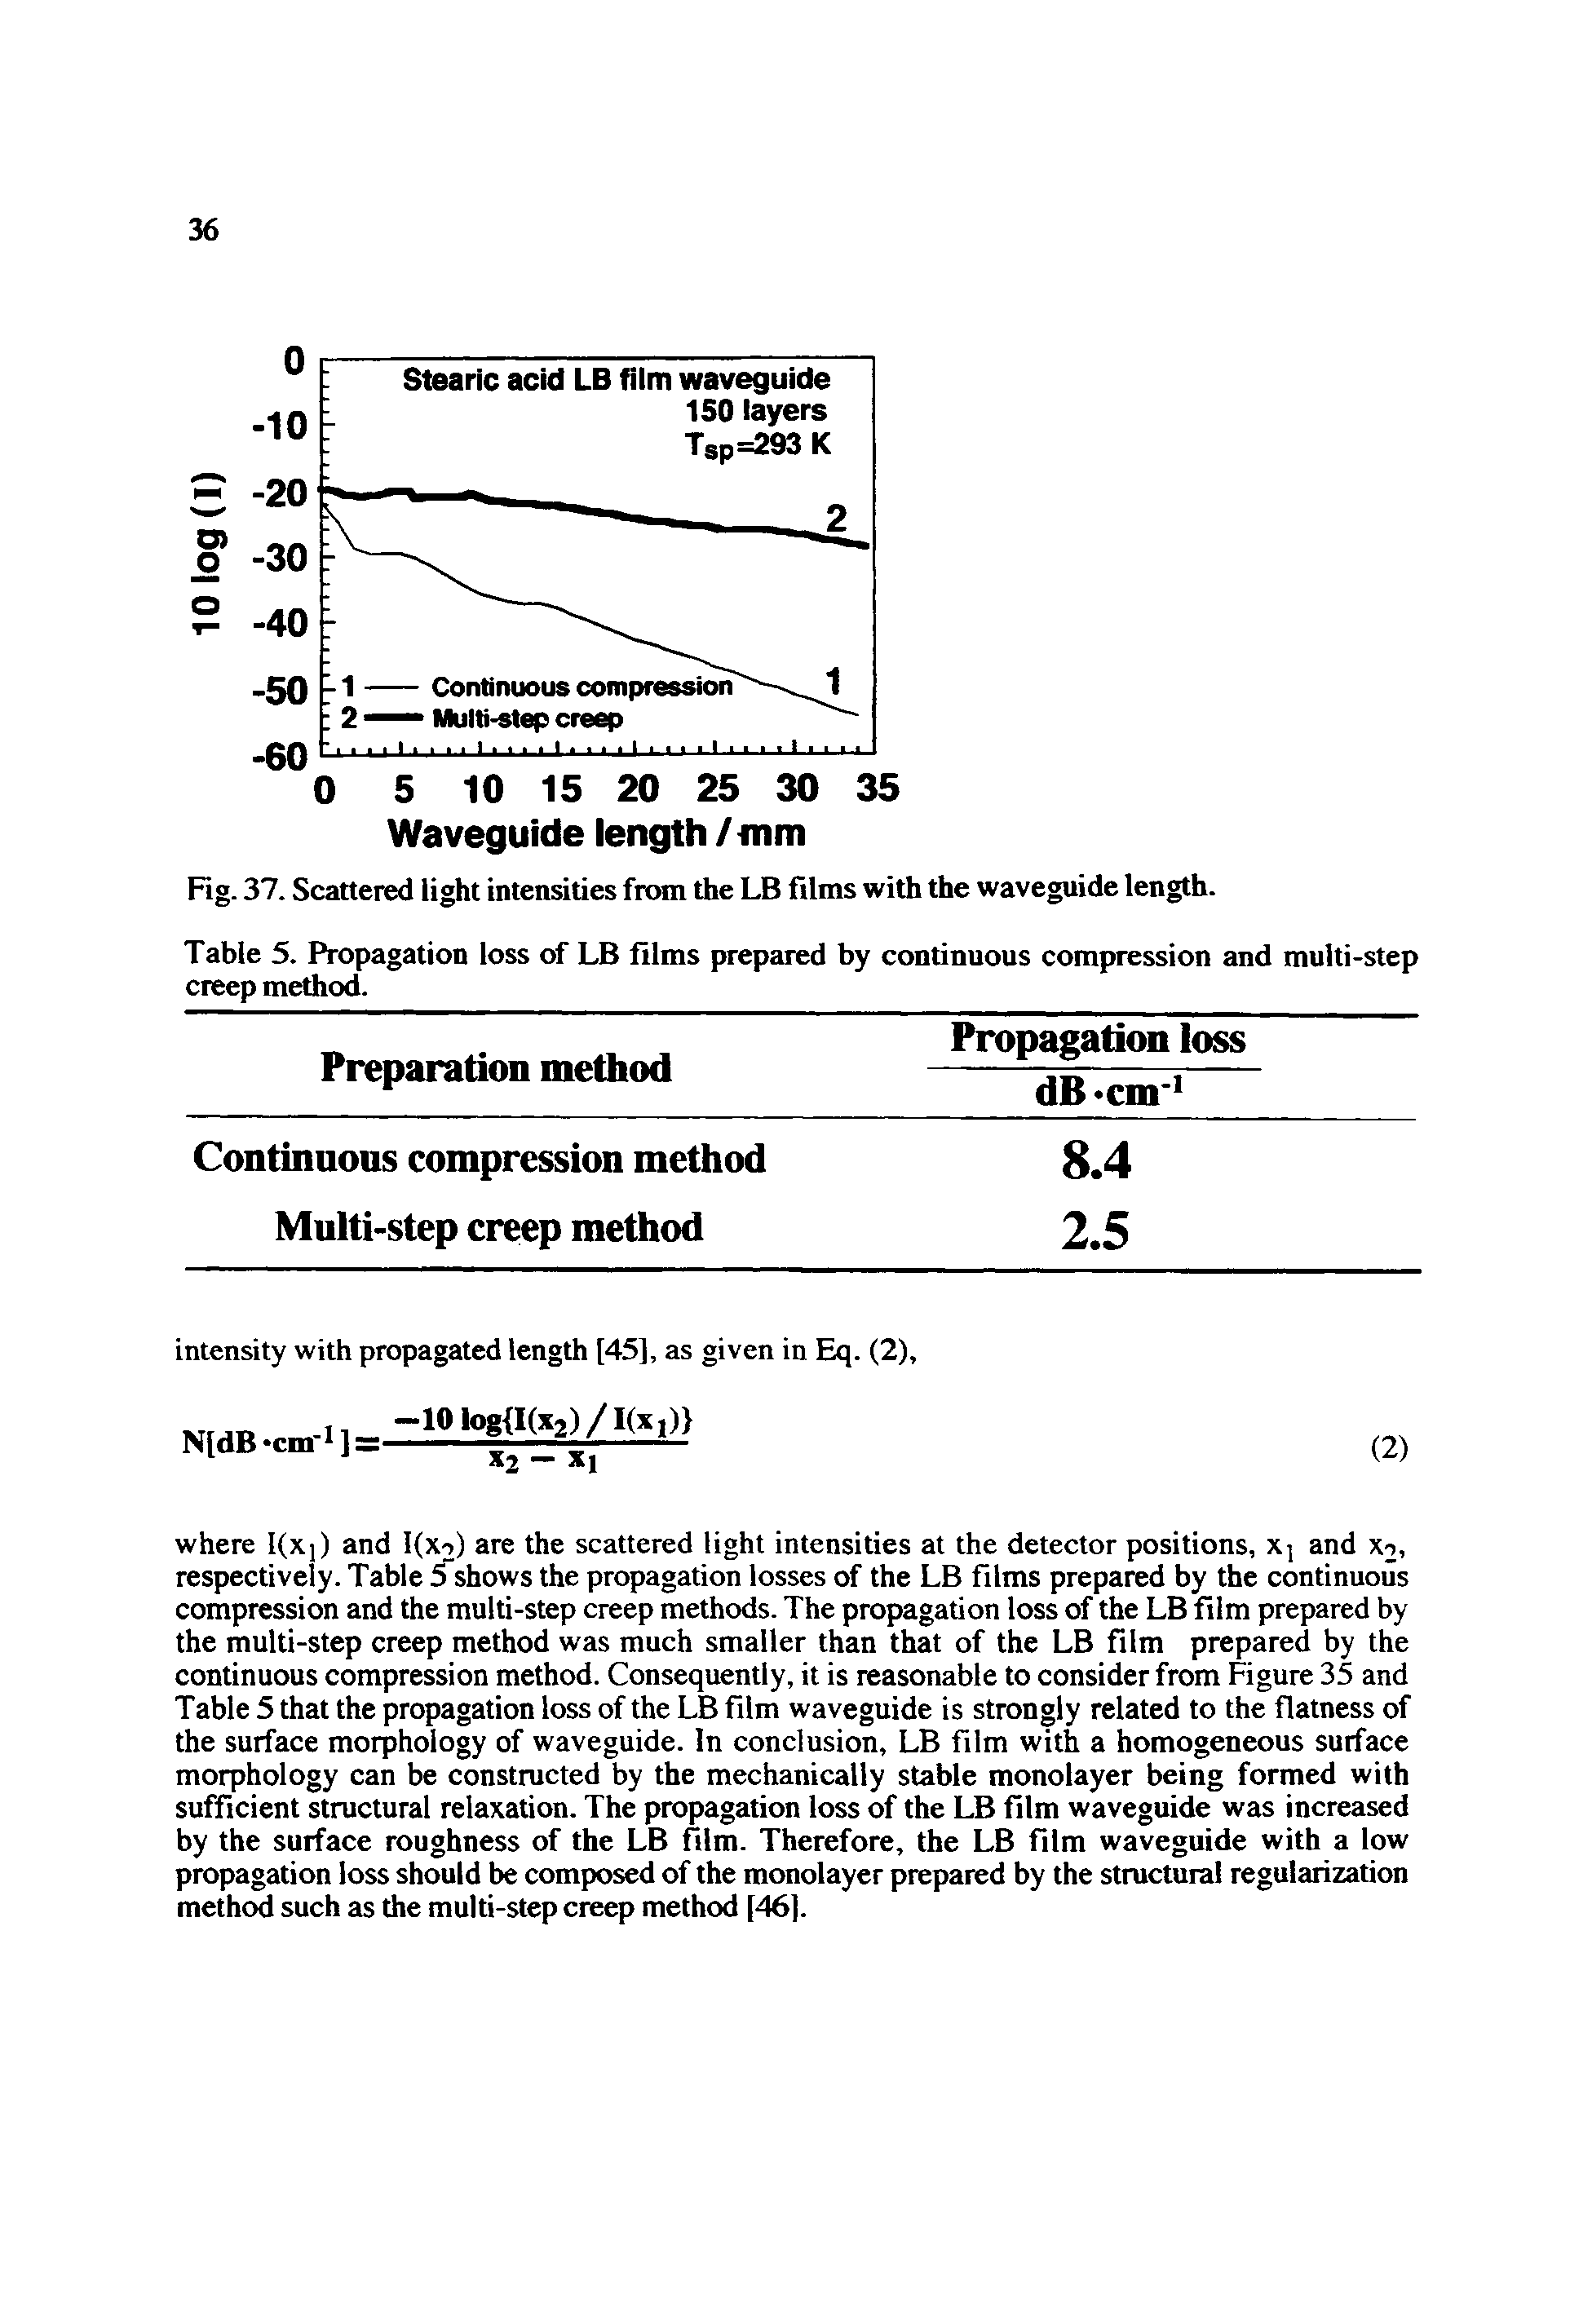 Table 5. Propagation loss of LB films prepared by continuous compression and multi-step creep method.